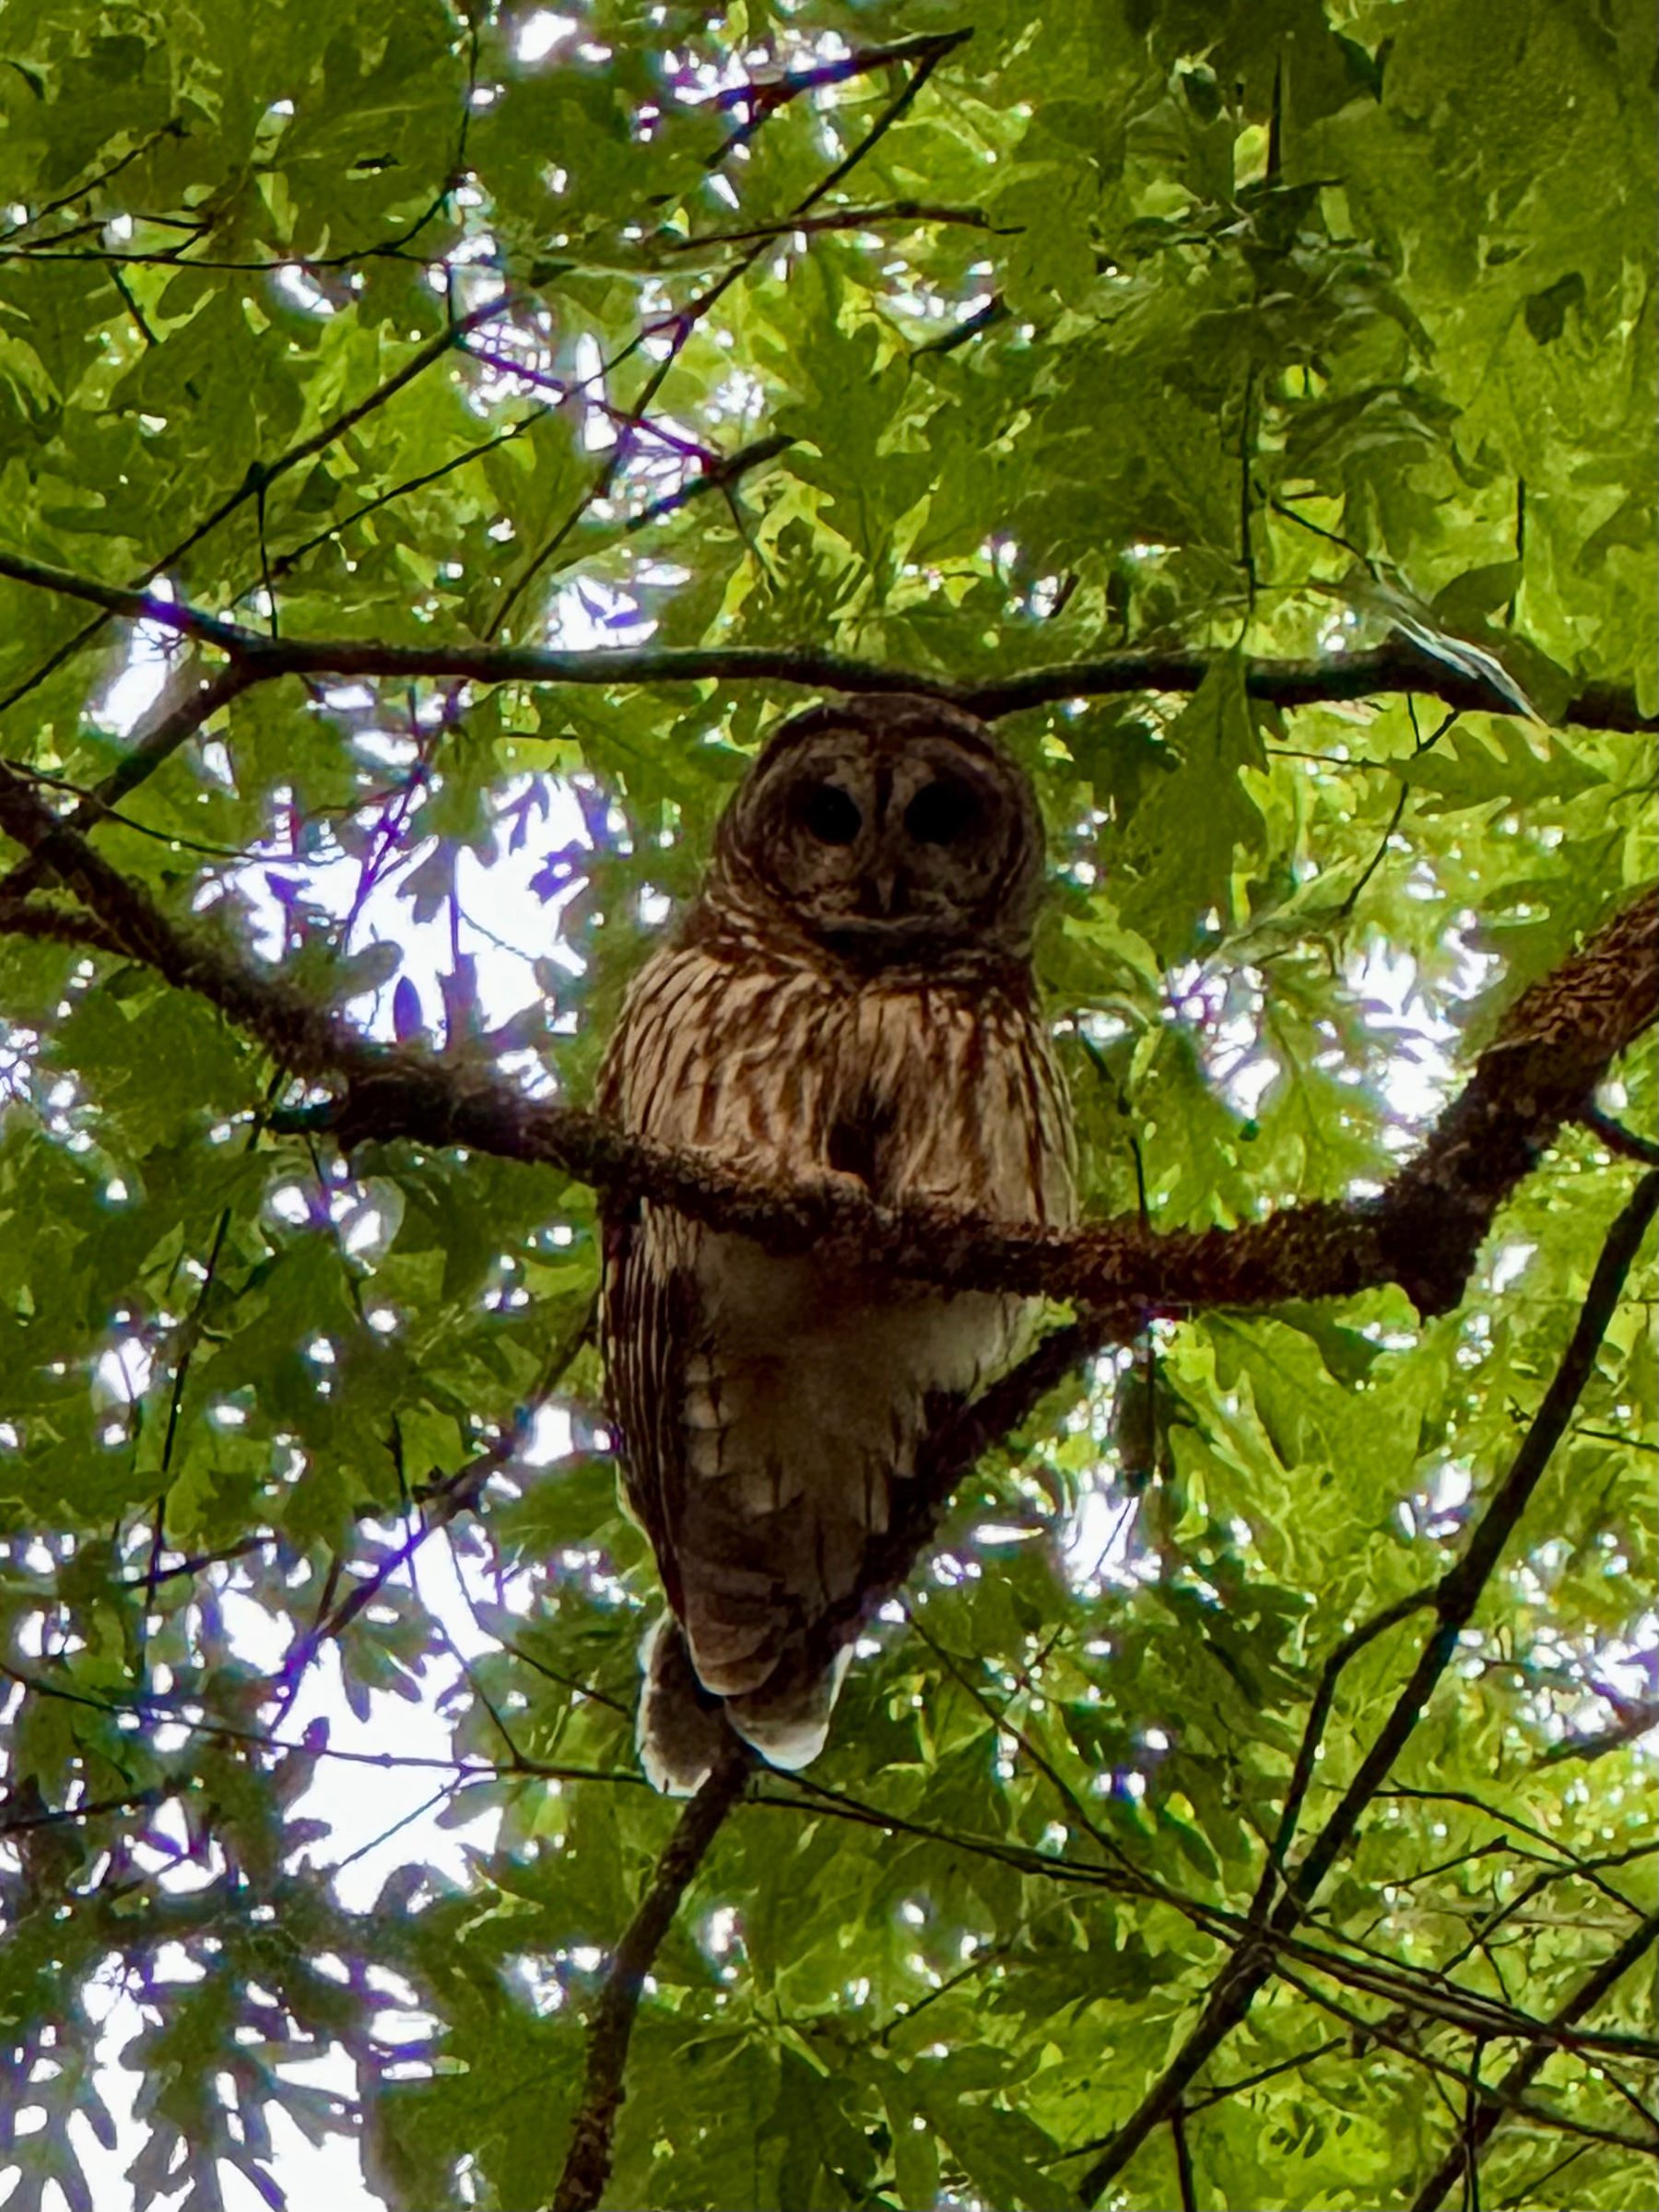 An adult barred owl perched on a tree branch with green leaves in the background.